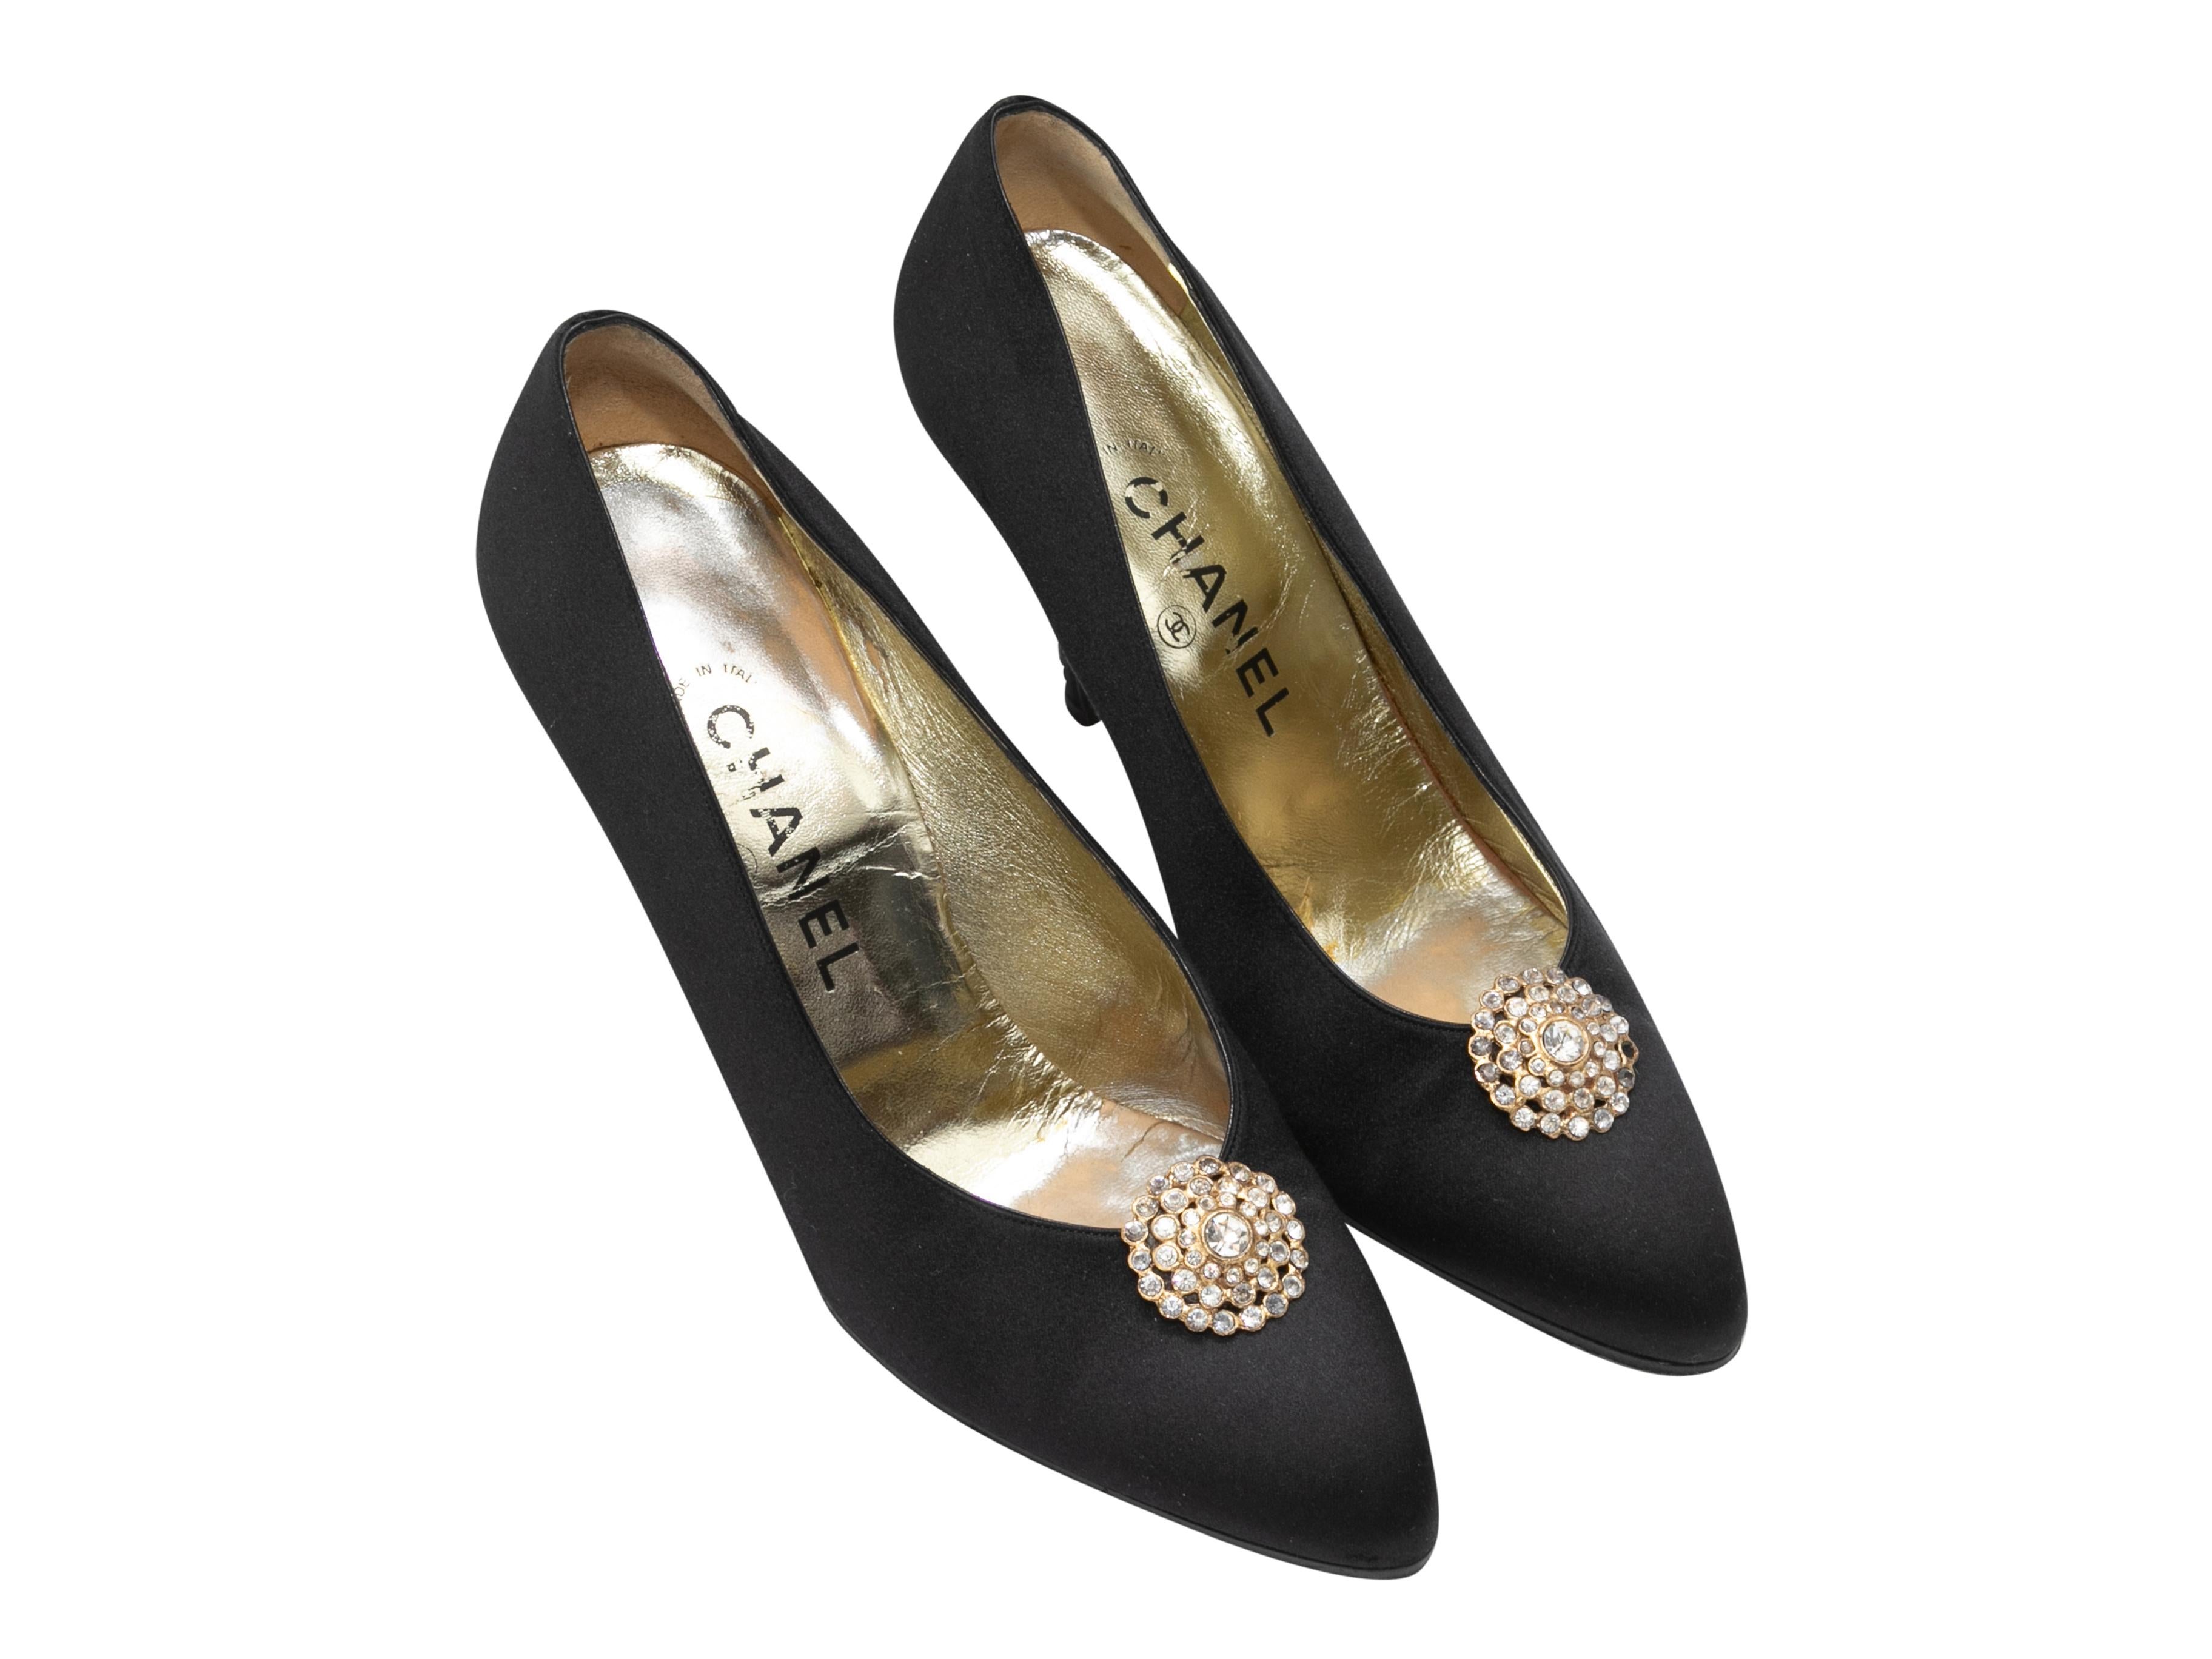 Black satin pointed-toe crystal-embellished pumps by Chanel. 3.5